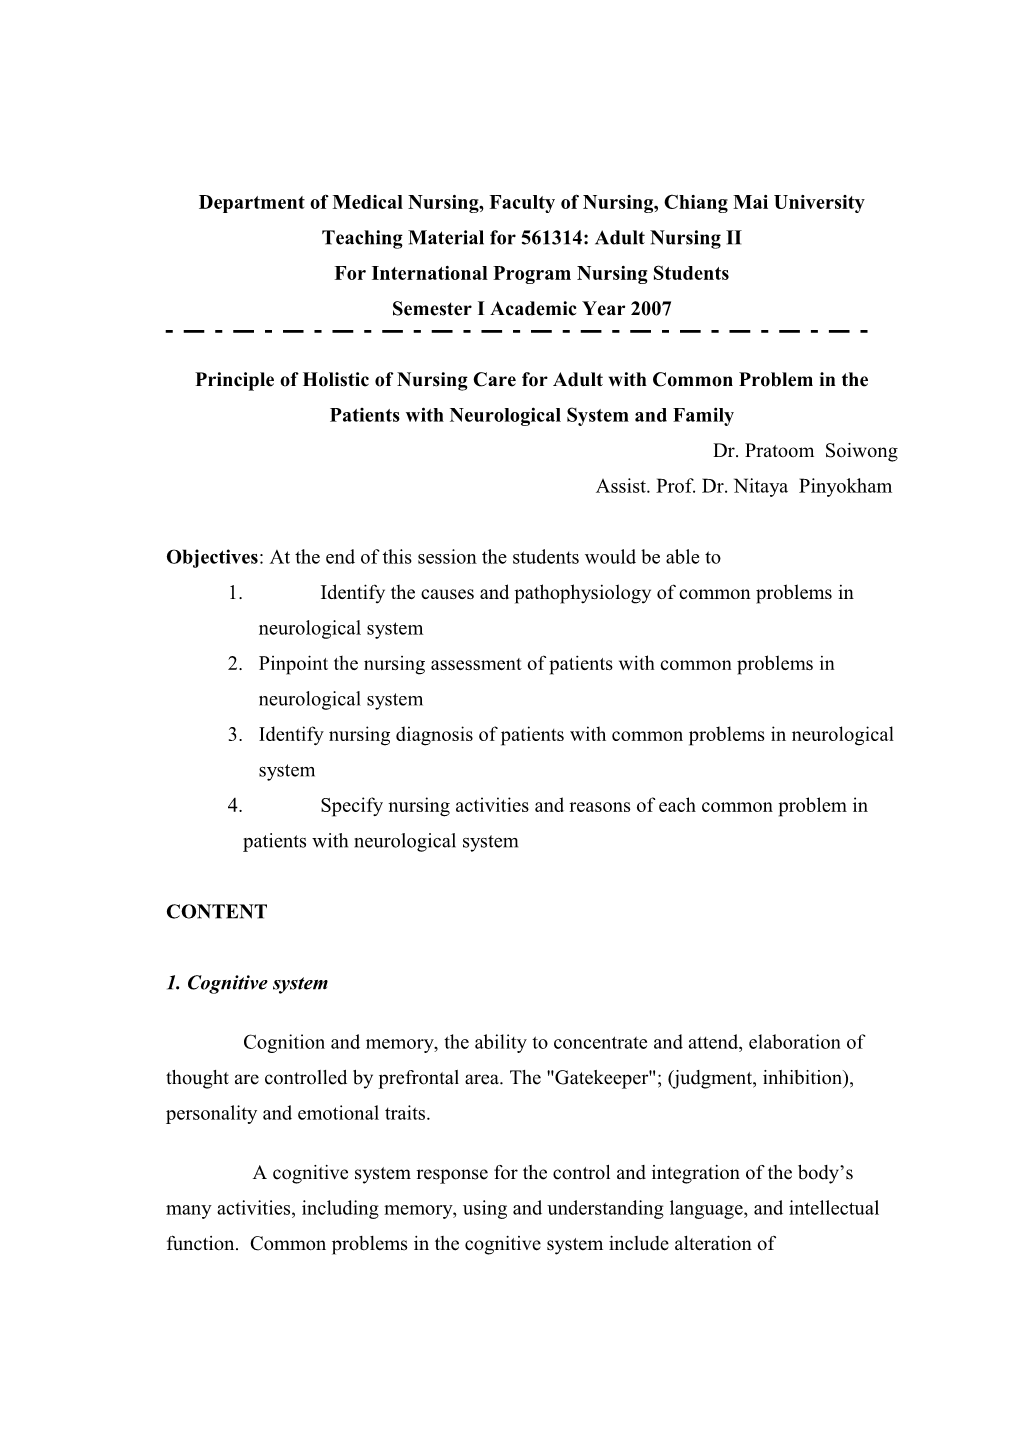 Principles of Holistic Nursing Care for Adults with Common Problems in the Neurological